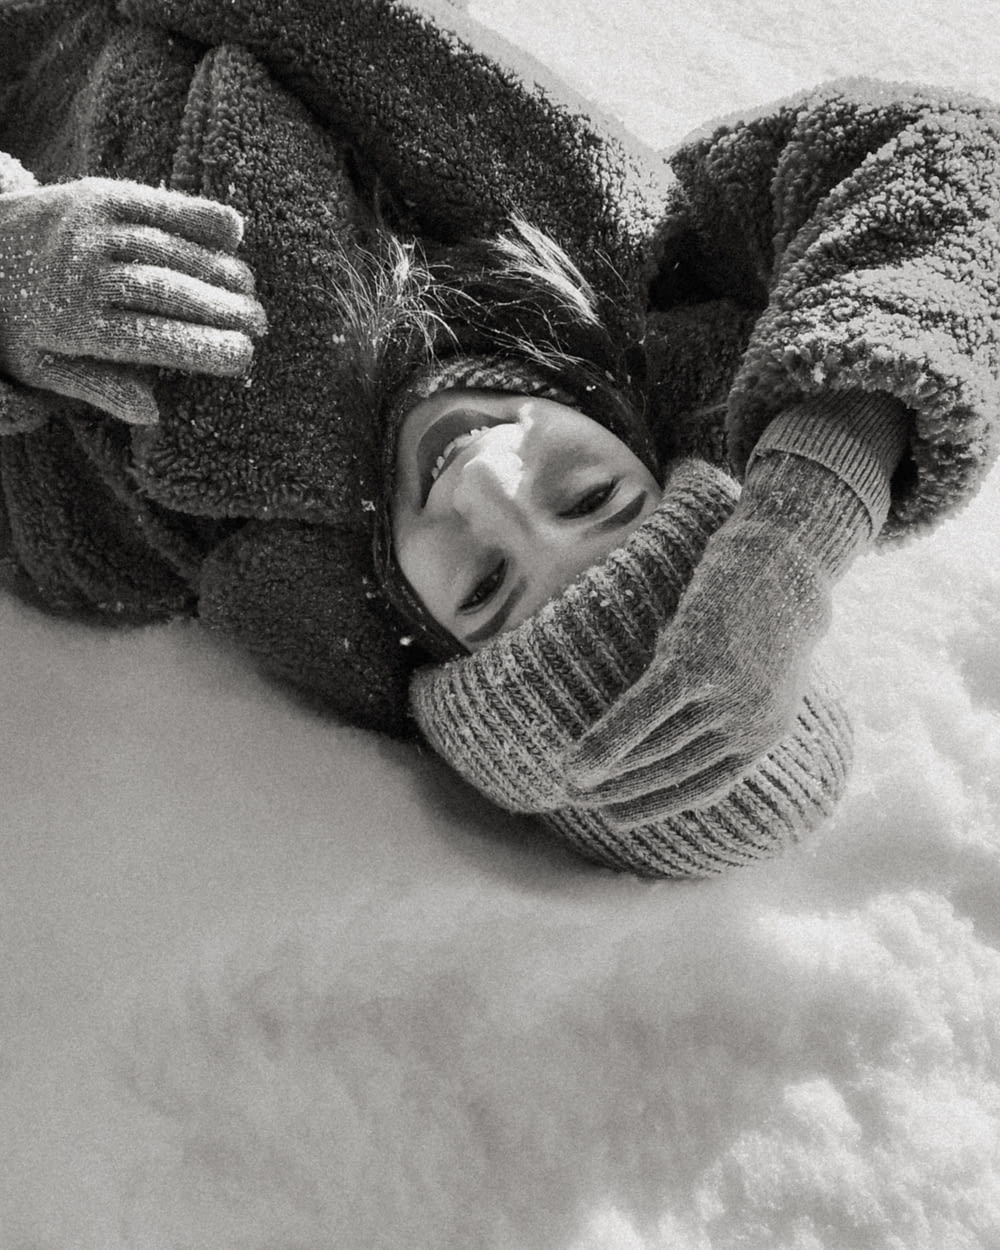 a young child laying in the snow wearing a hat